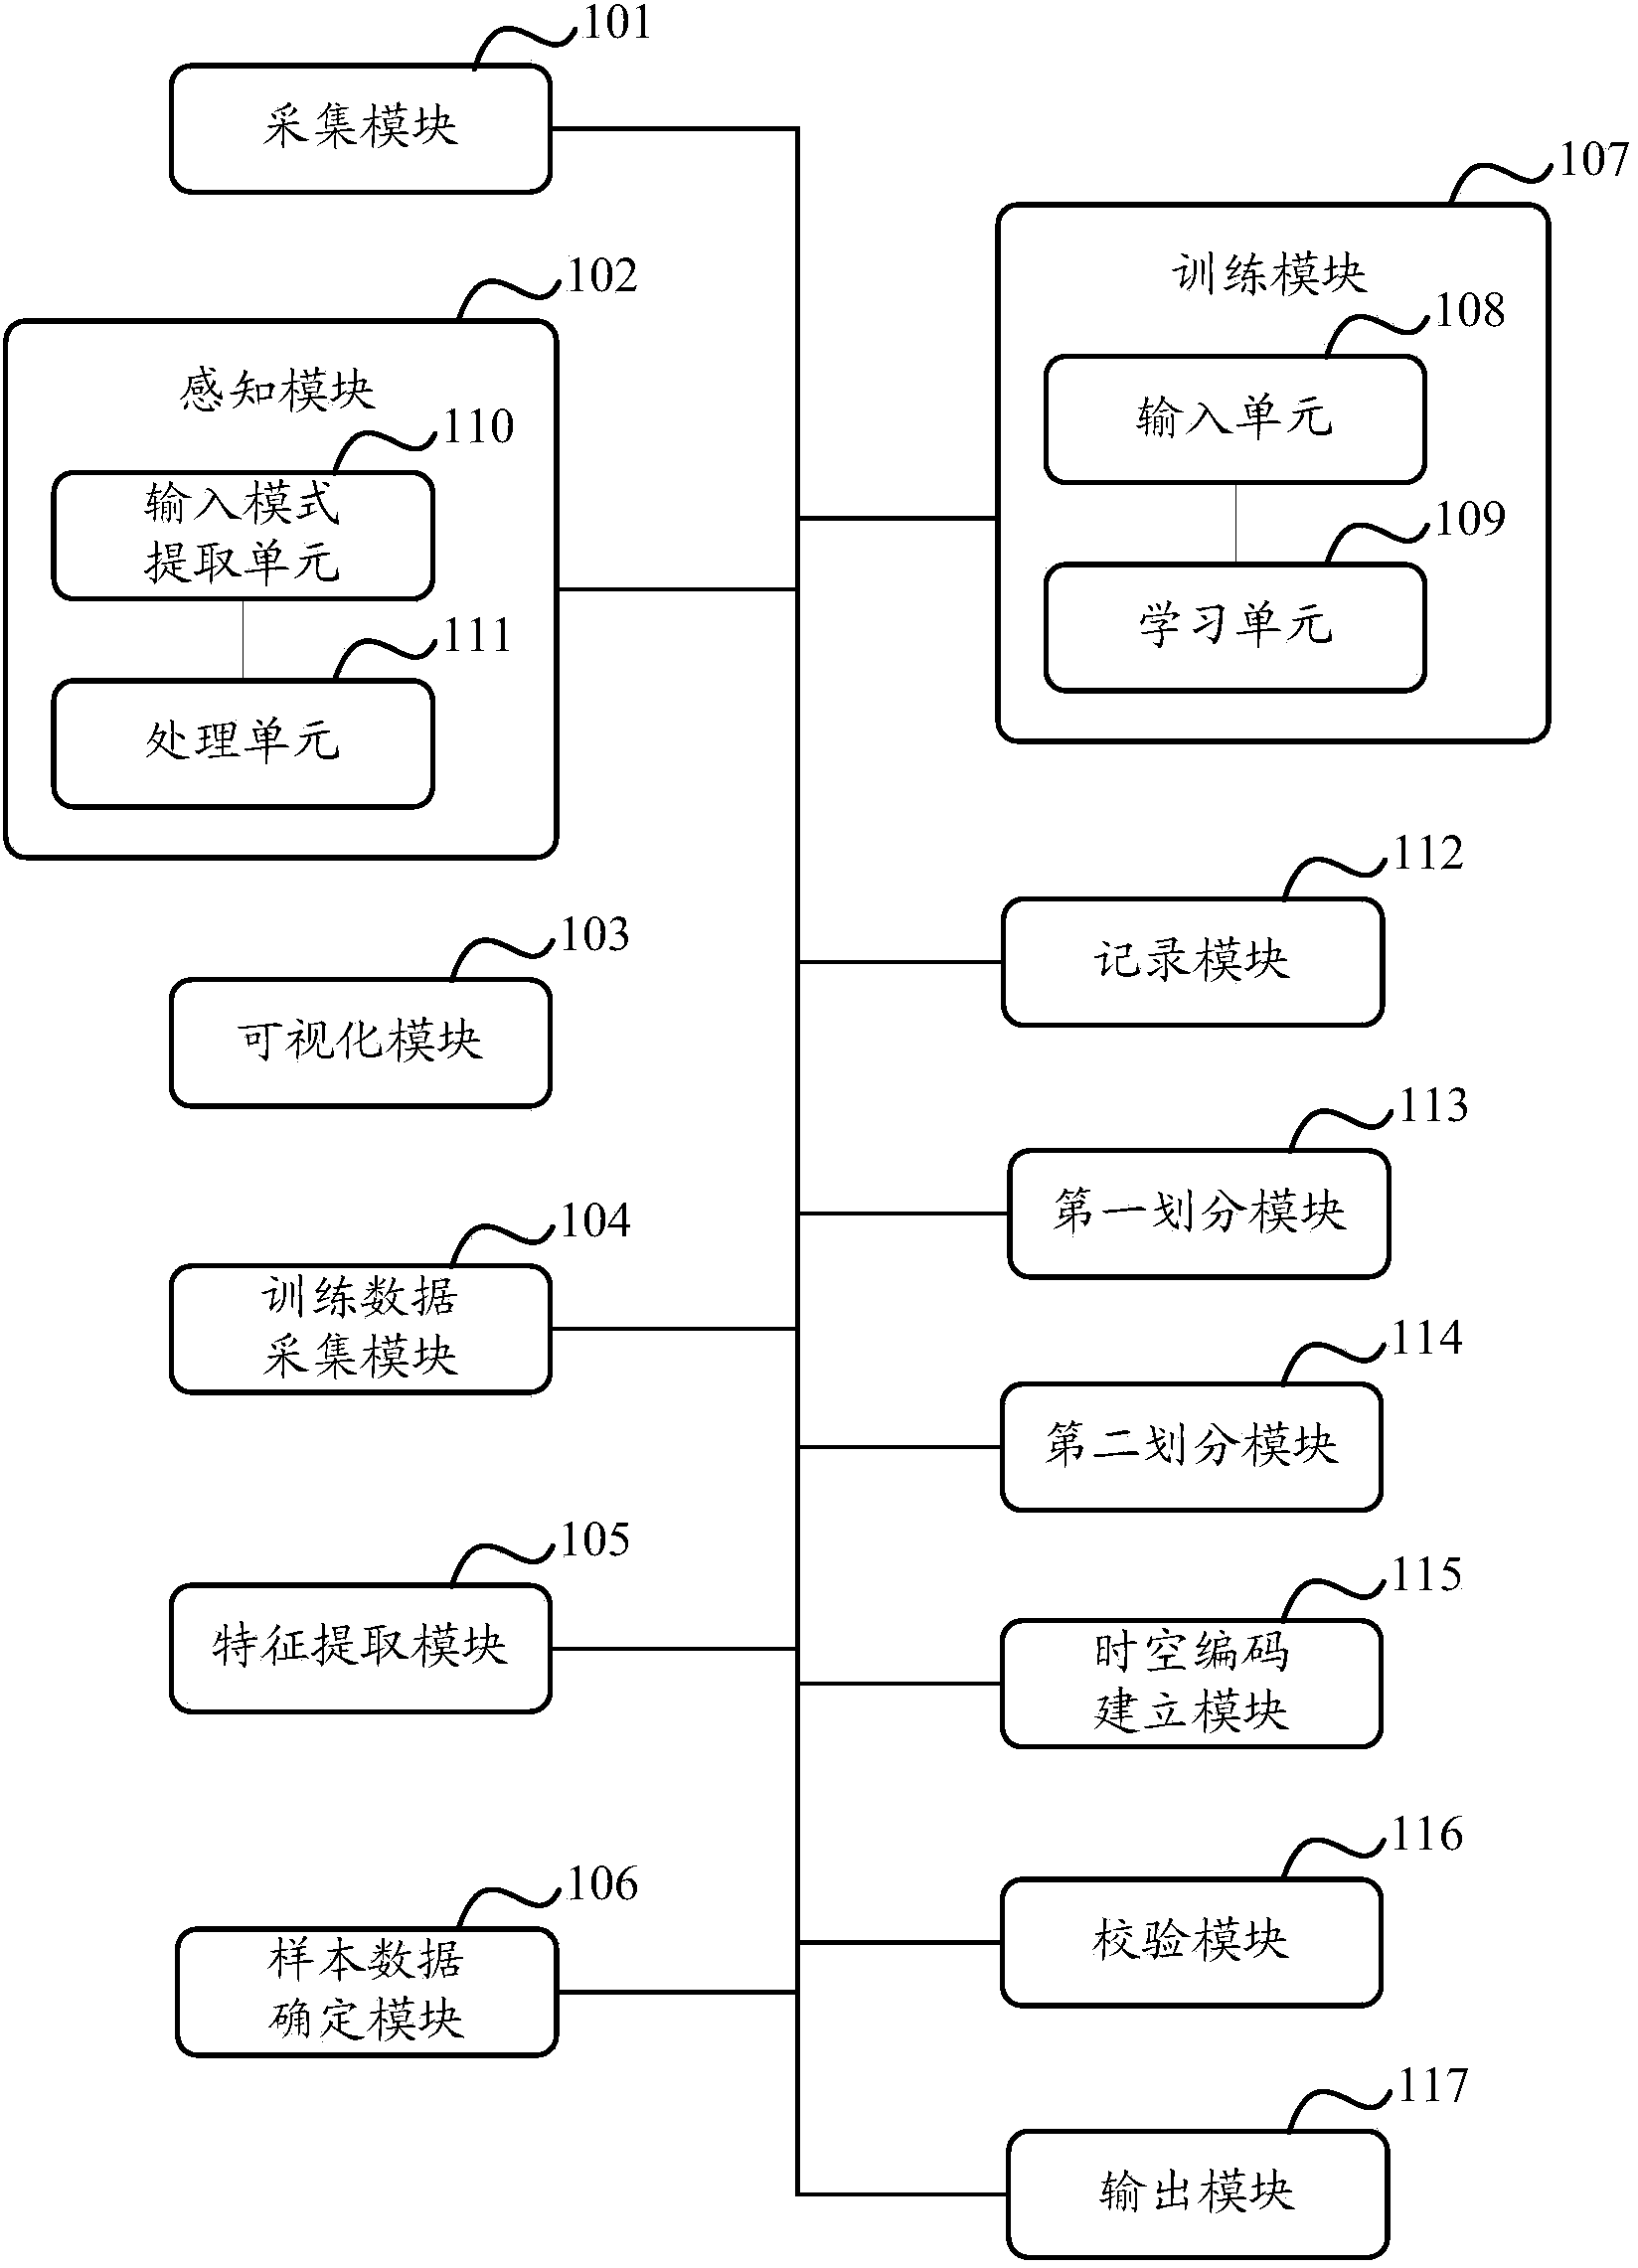 Network security situation sensing system and method